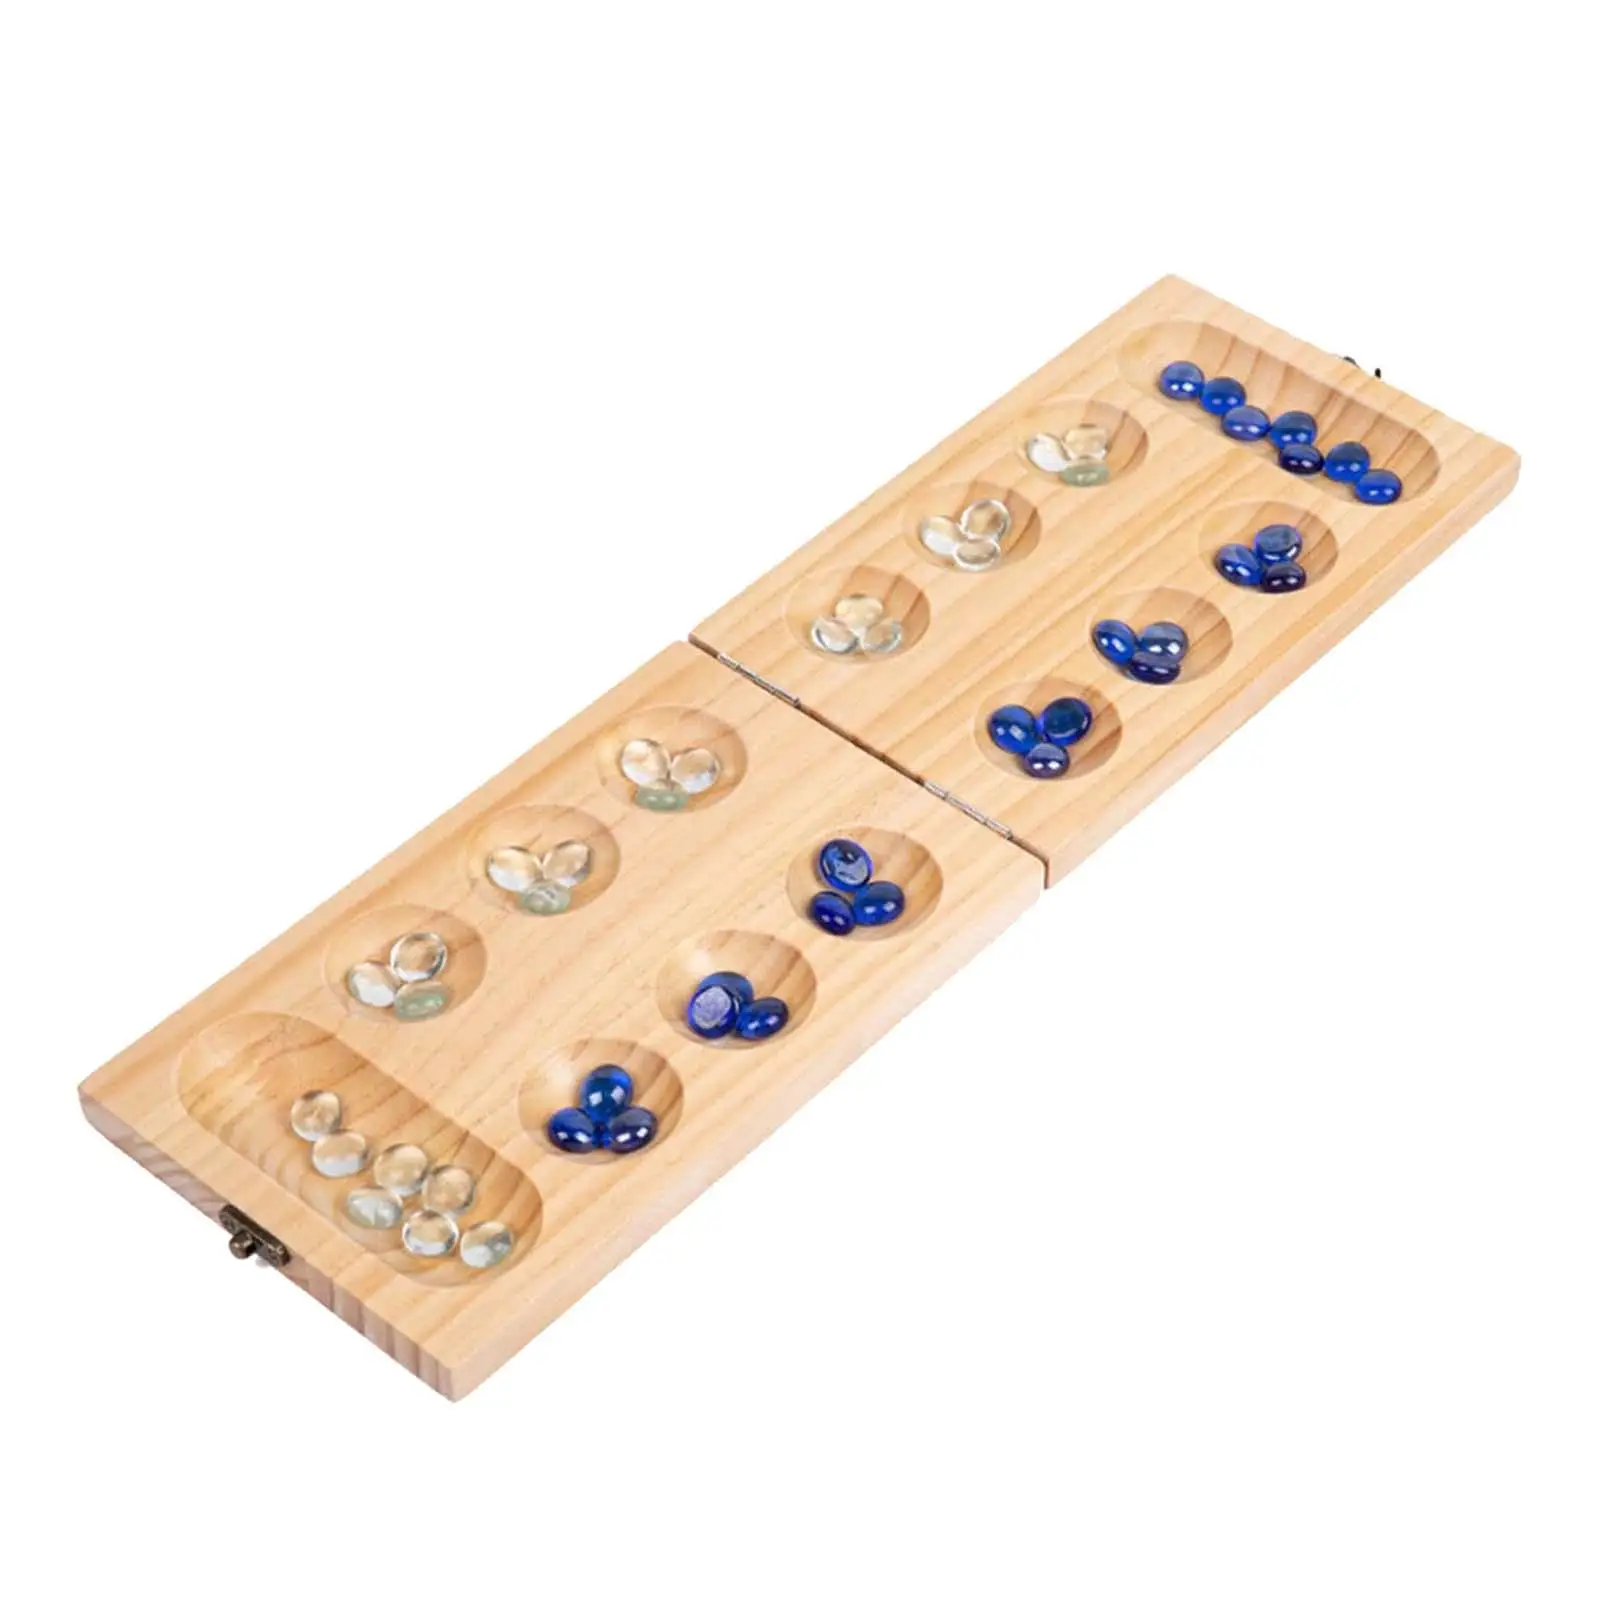 Wooden Mancala Board Game 2 Player Game Set Foldable Mancala Board Game 48 Beads for travel party Teen Adult kids